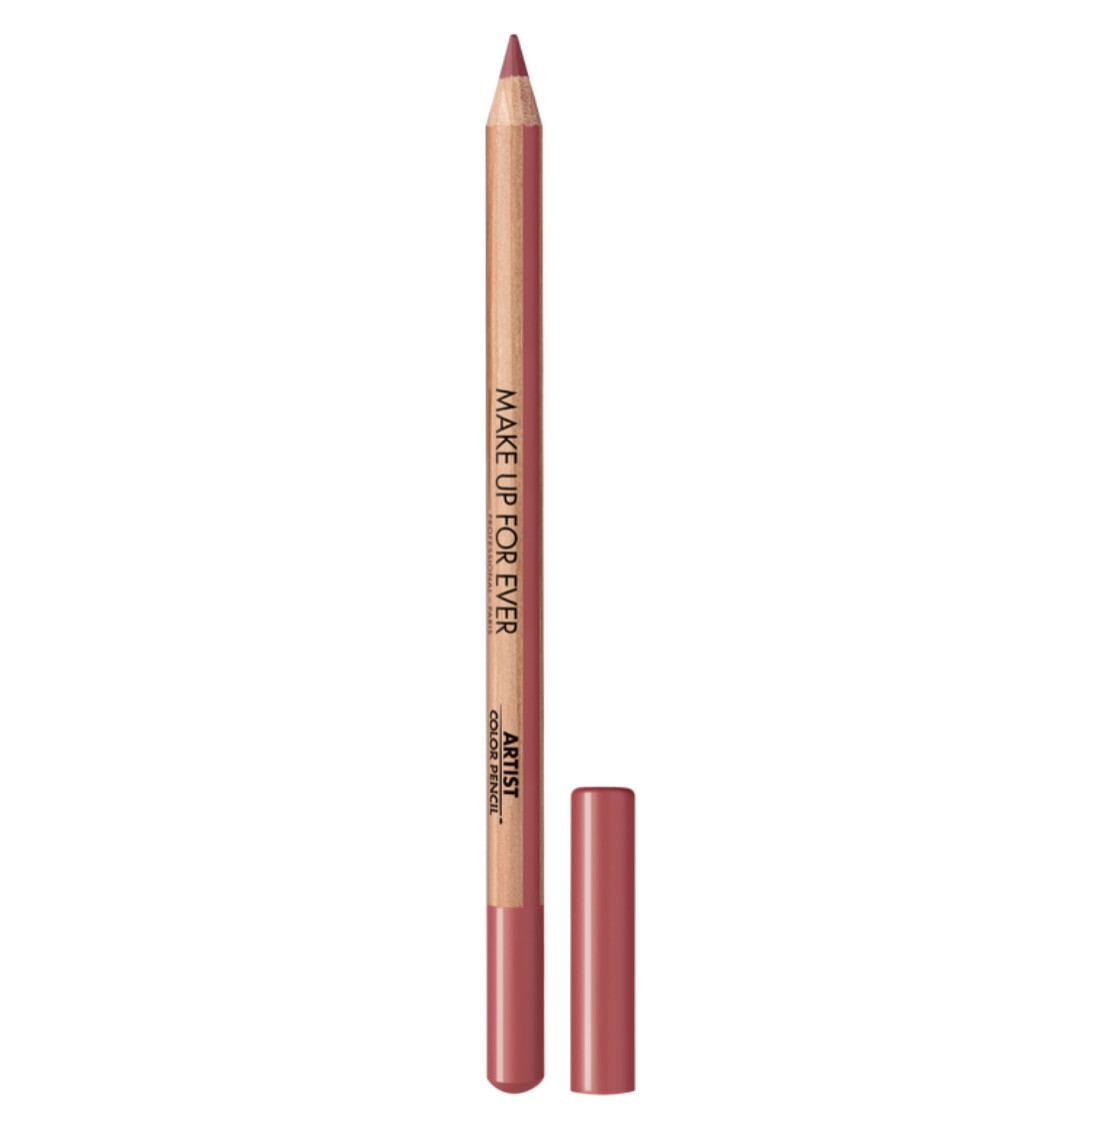 Make Up For Ever - Artist Color Pencil: Eye, Lip & Brow Pencil | 808 Boundless Berry